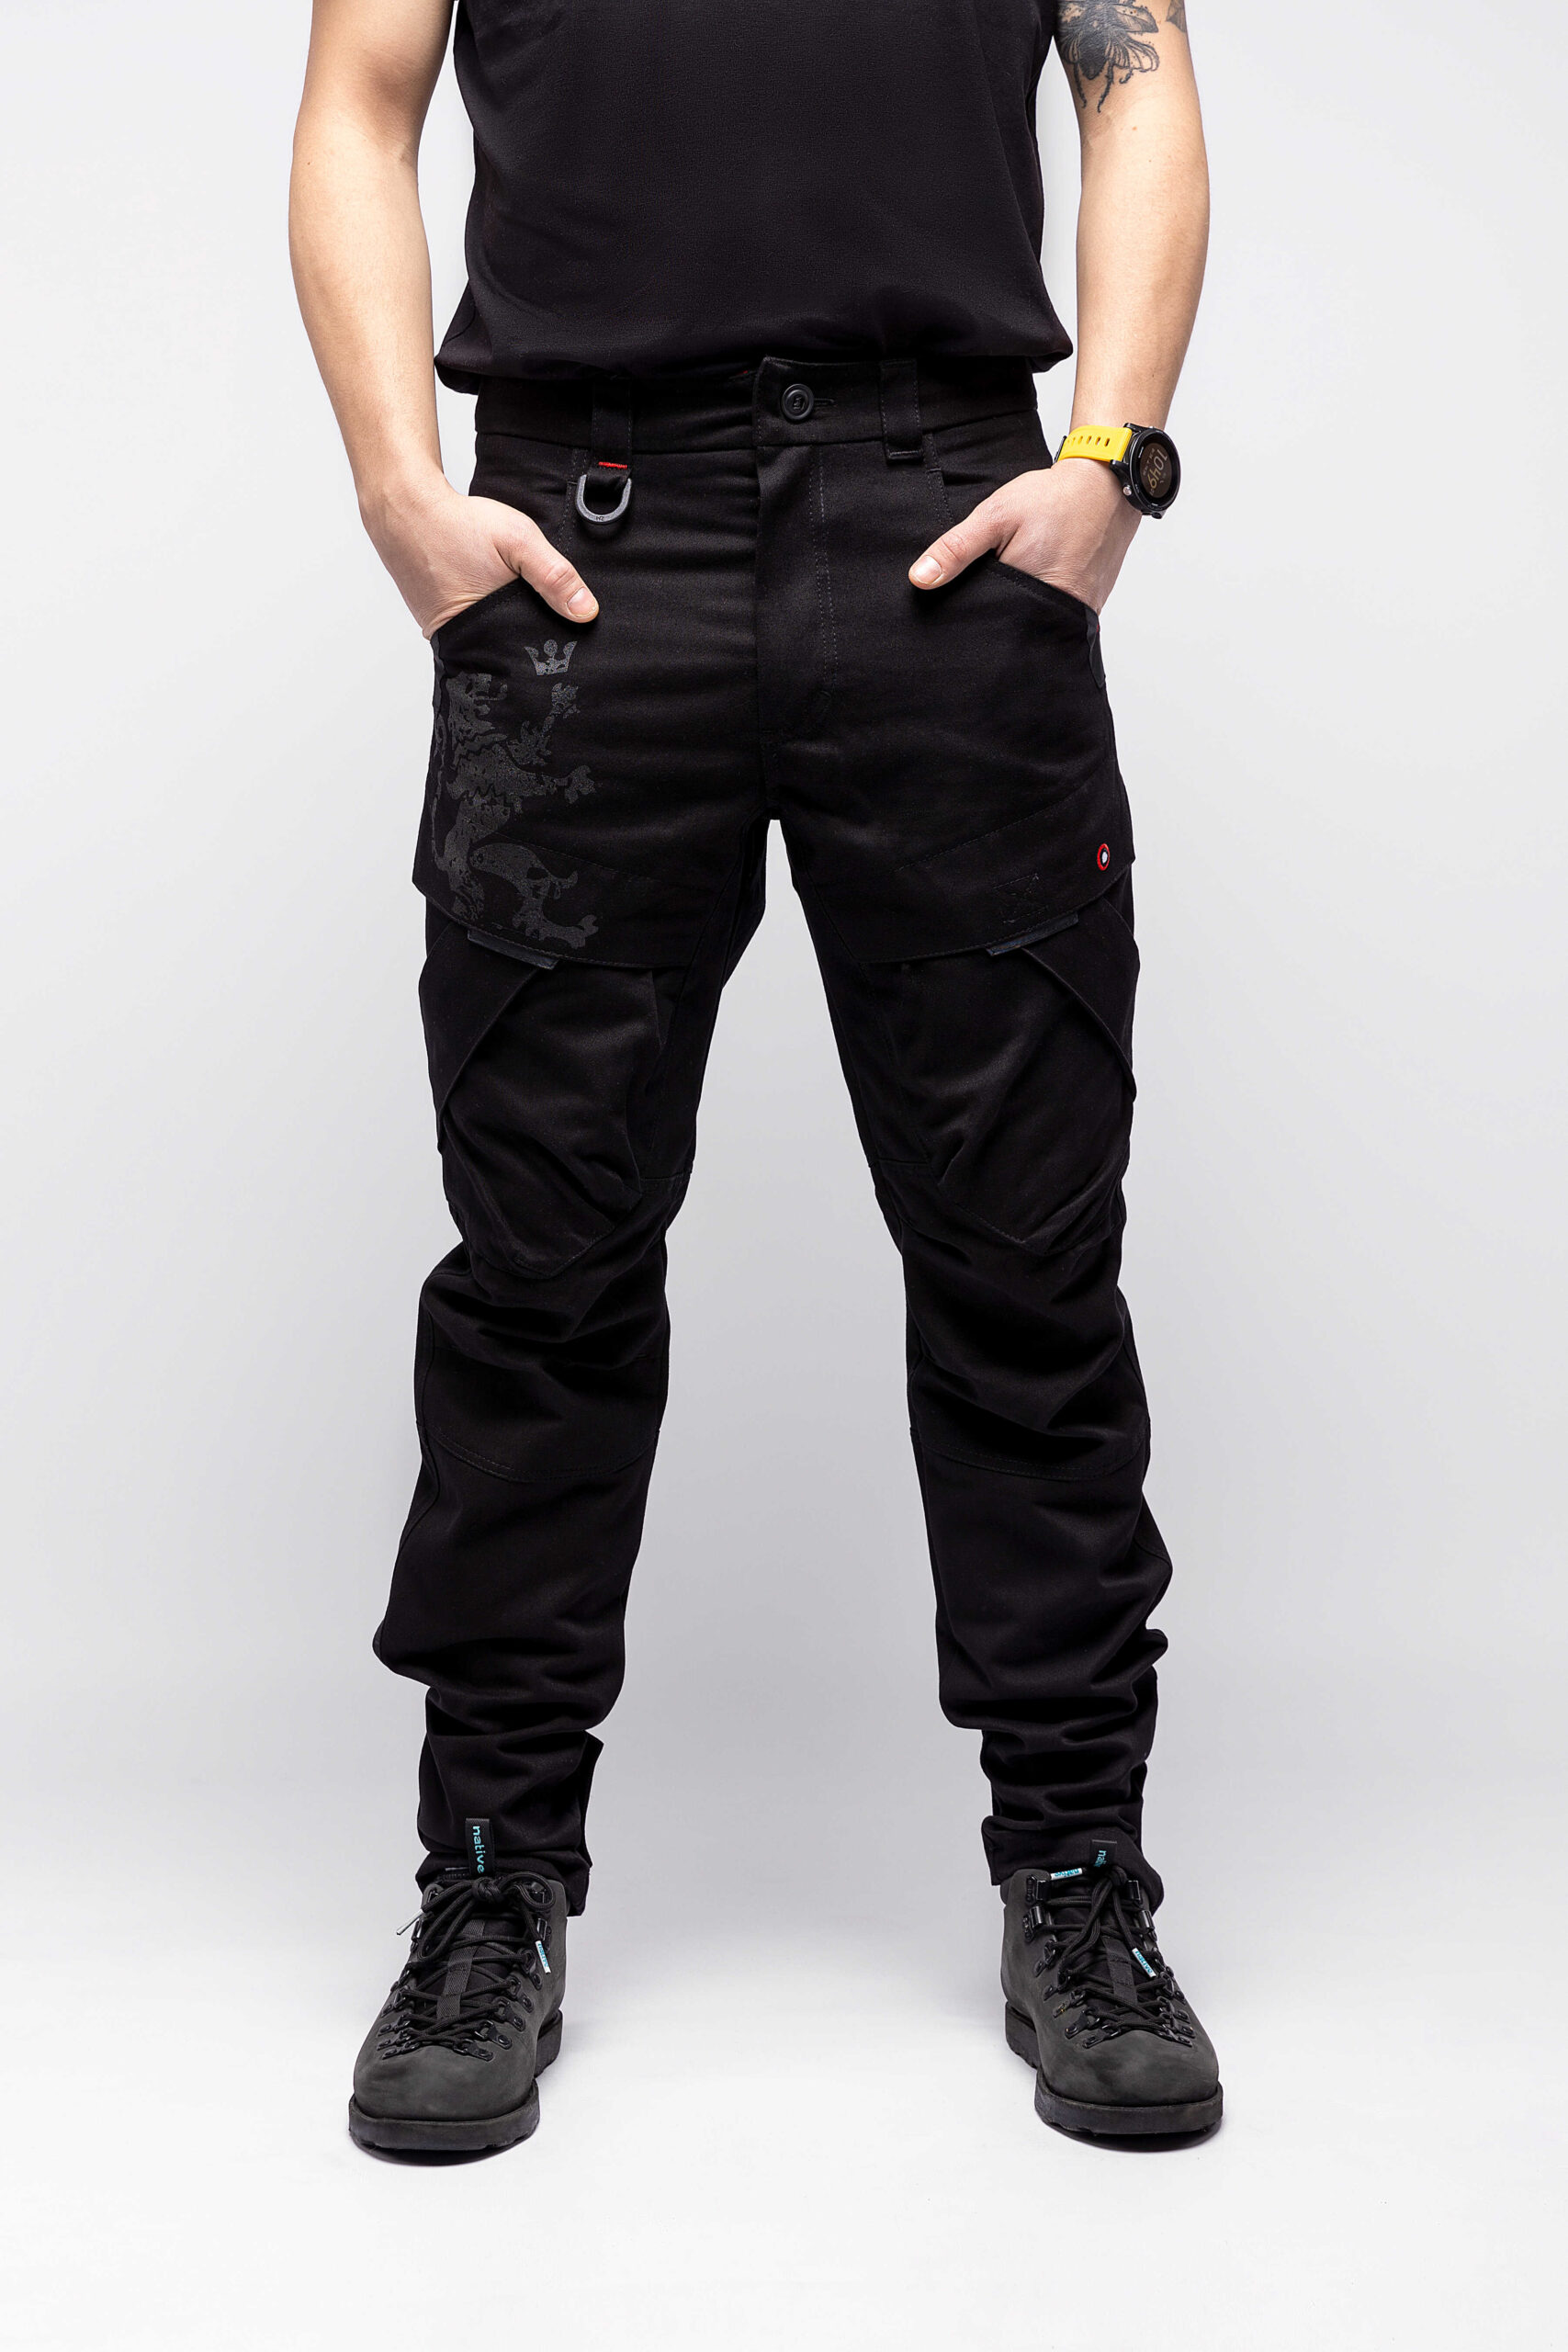 Men's Cargo Pants Terminal A. Color black. The color shades on your screen may differ from the original color.